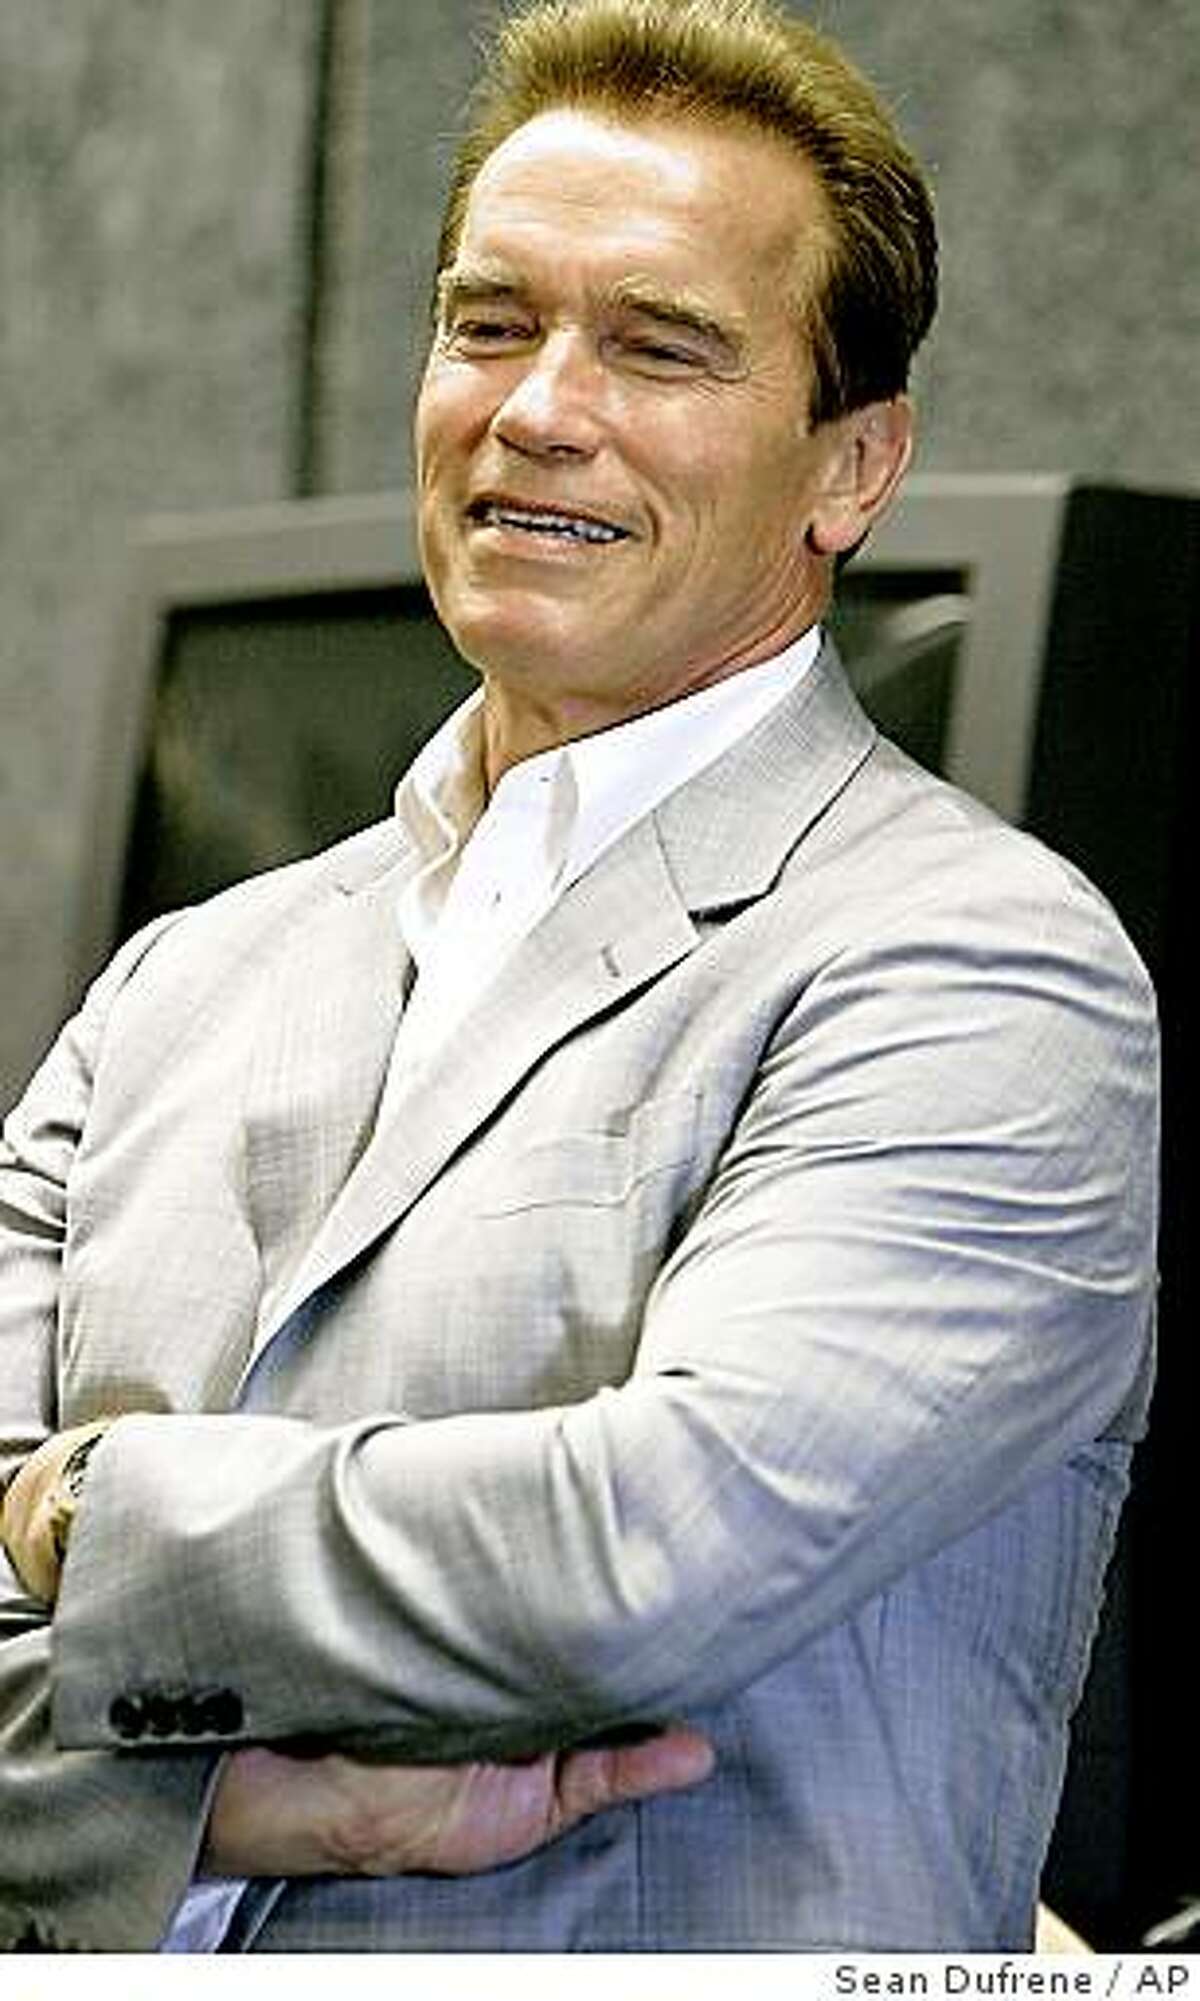 Caption History: California Gov. Arnold Schwarzenegger listens to the Carlsbad High School band's rendition of "Secret Agent Man" during a visit to the school, Friday, Aug. 11, 2006, in Carlsbad, Calif. Schwarzenegger visited the northern San Diego County school in an effort to highlight the school's arts, music and physical education program, something he says is needed in all California schools. Schwarzenegger has put aside $645 million to fund those kinds of programs